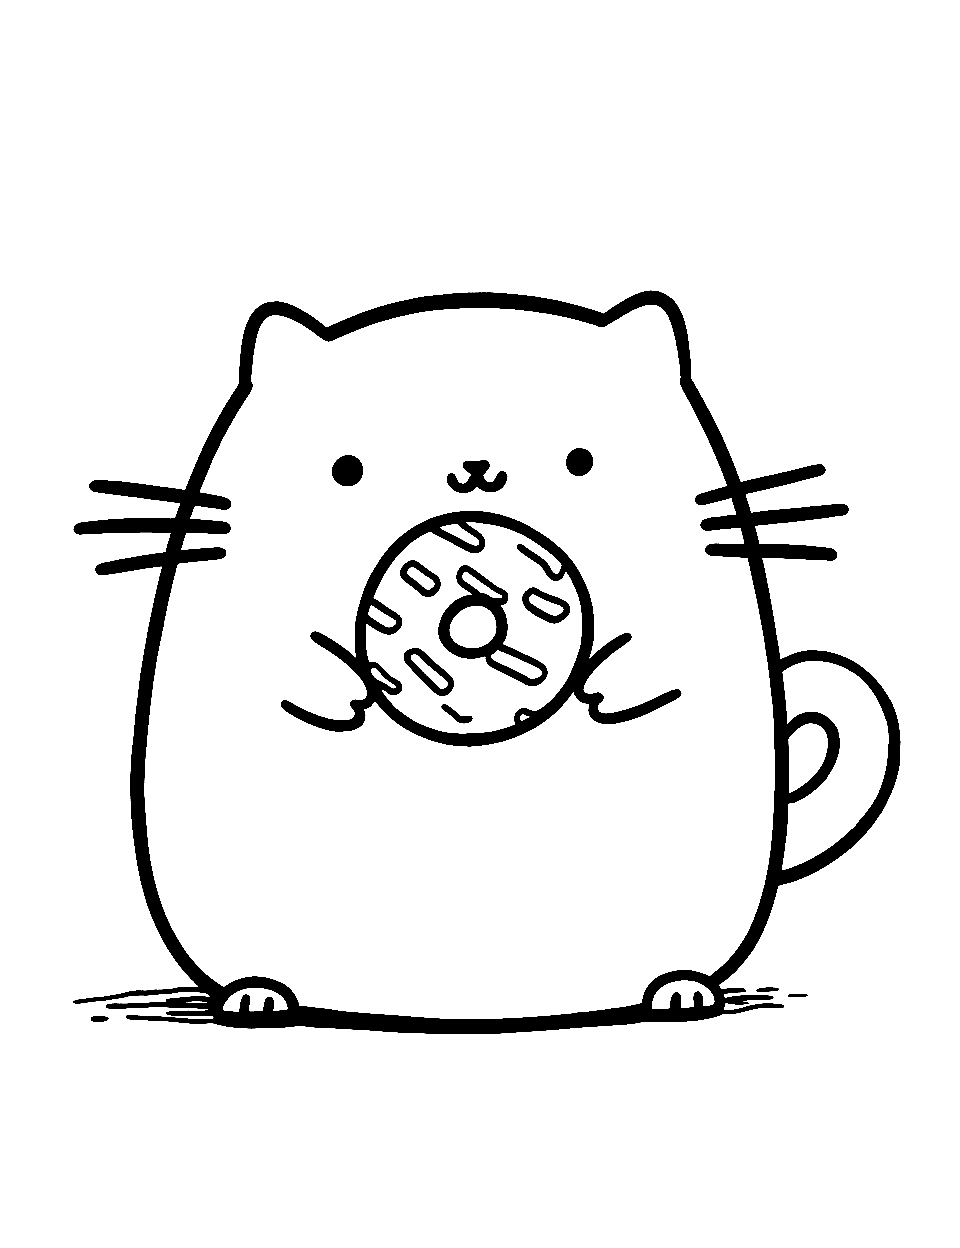 Morning Donut Coloring Page - Pusheen with a delicious donut ready to devour it.